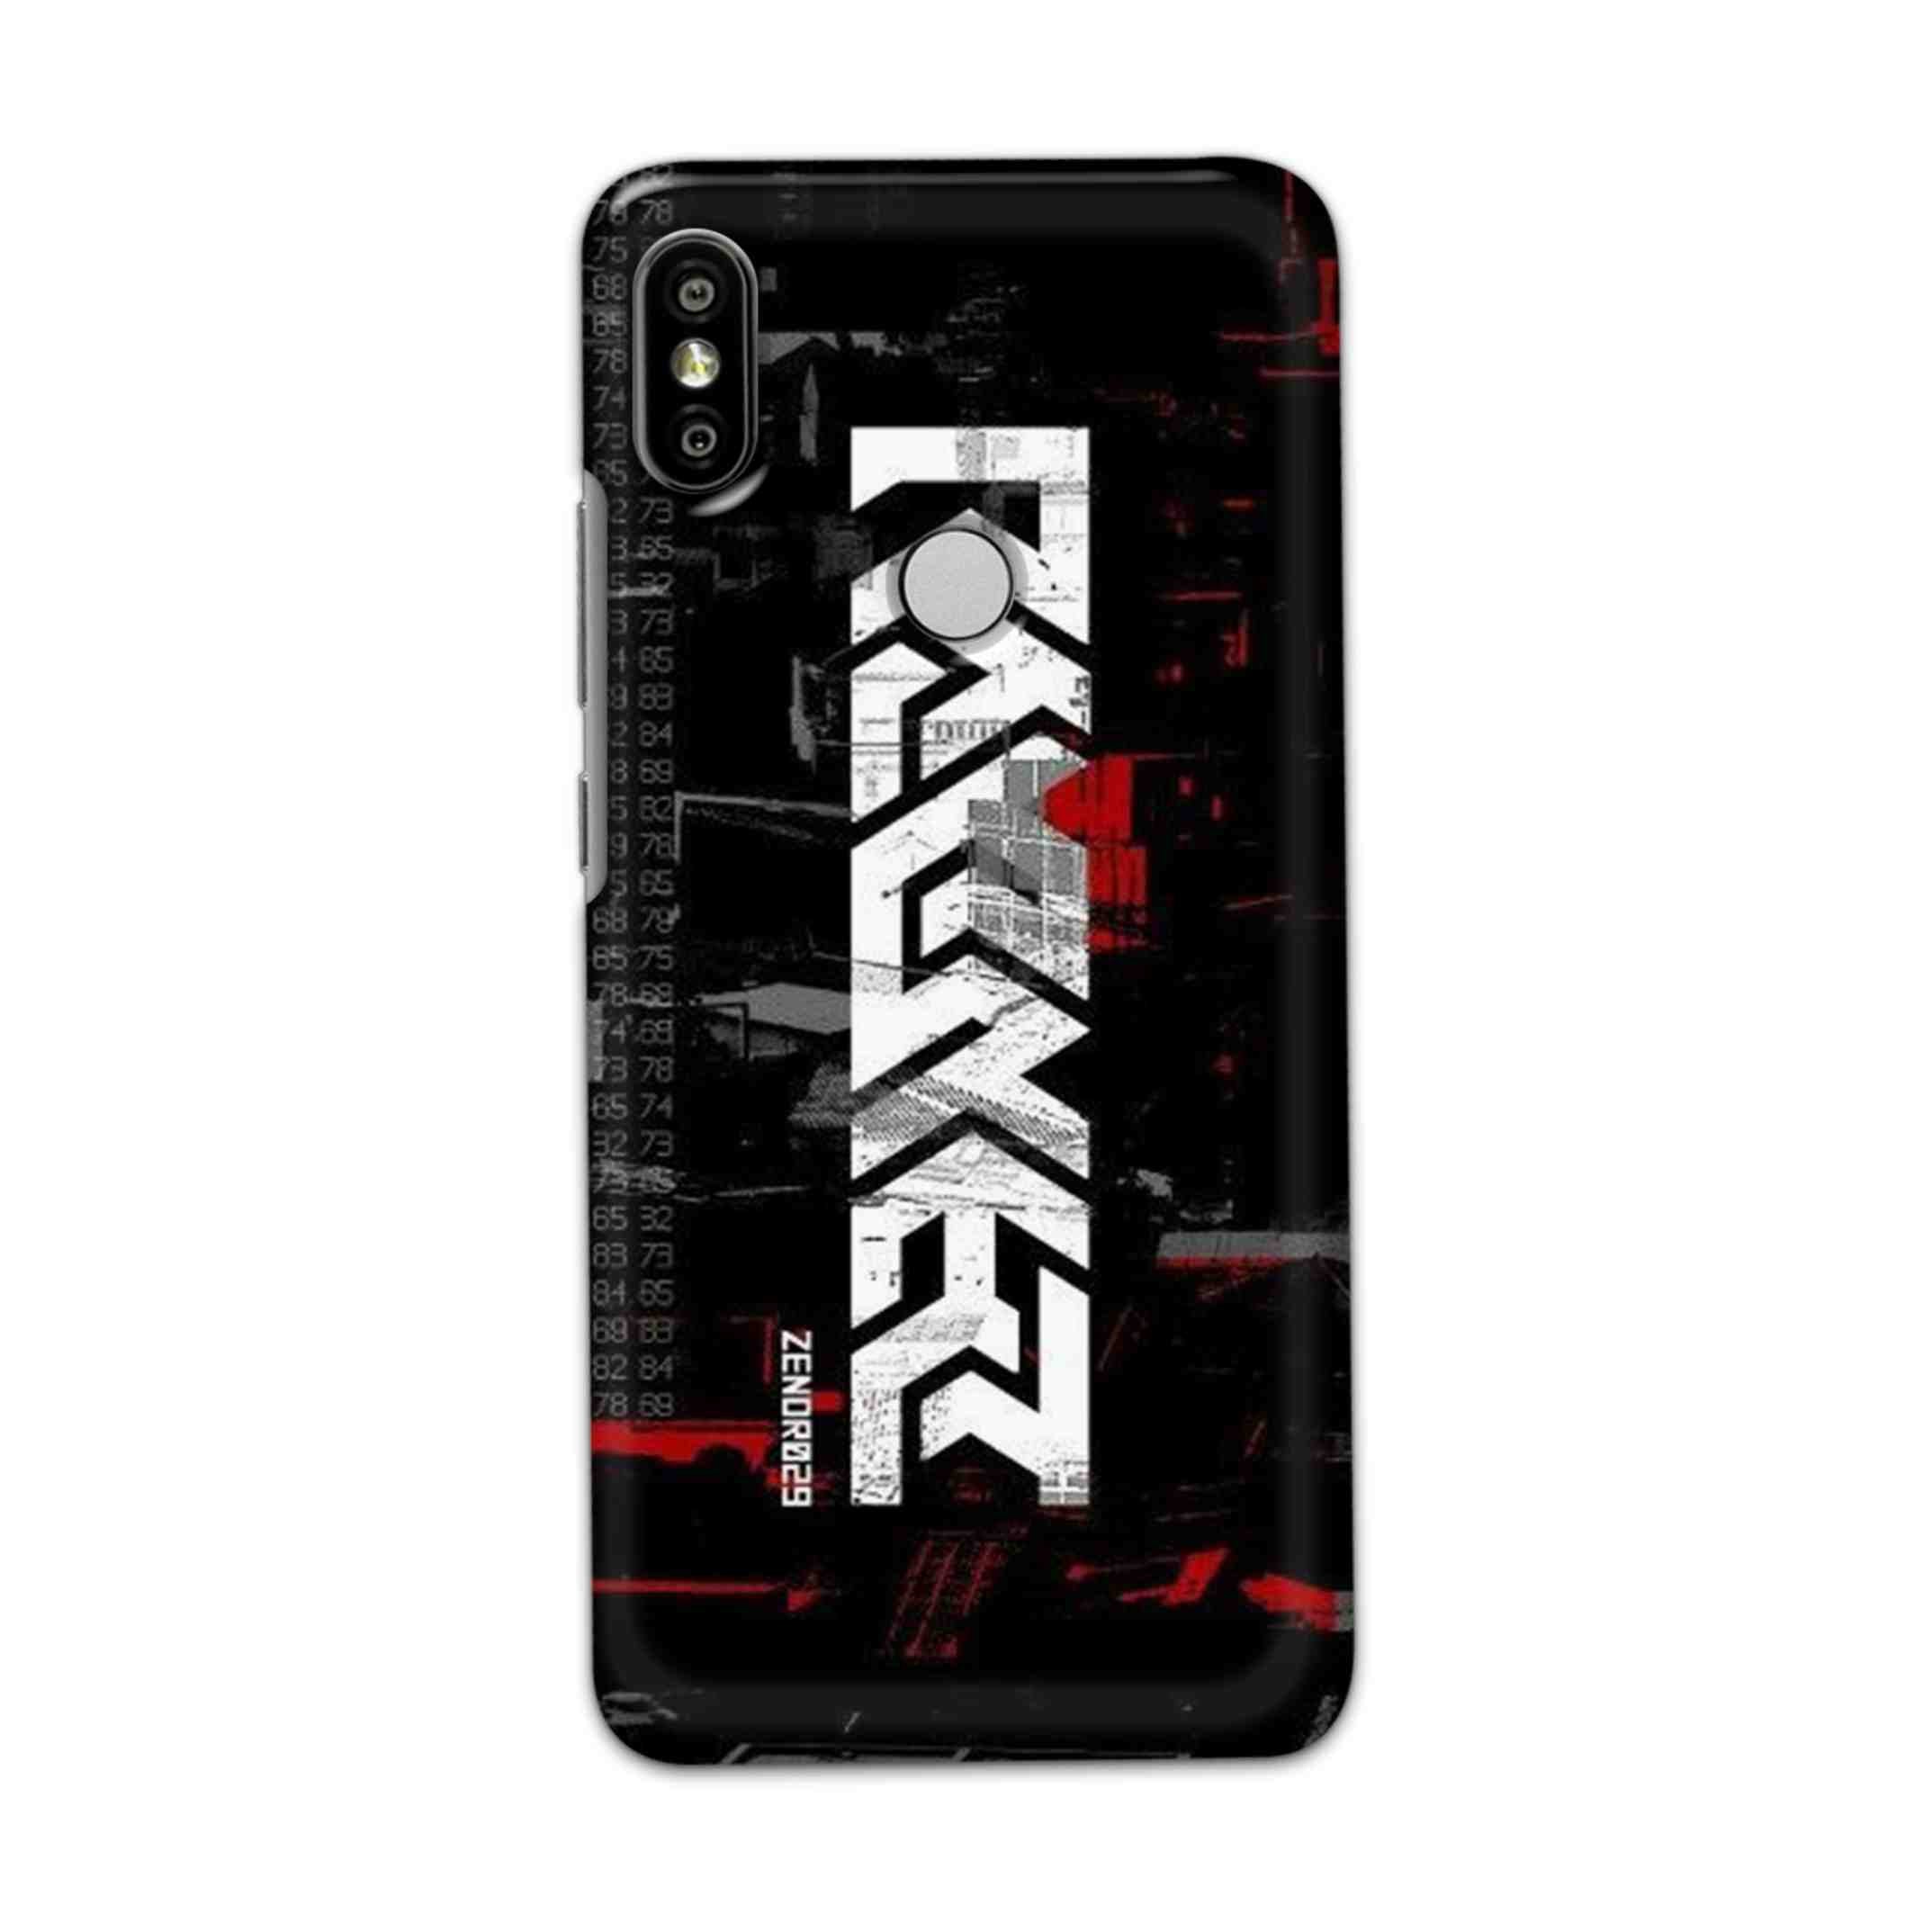 Buy Raxer Hard Back Mobile Phone Case Cover For Redmi S2 / Y2 Online